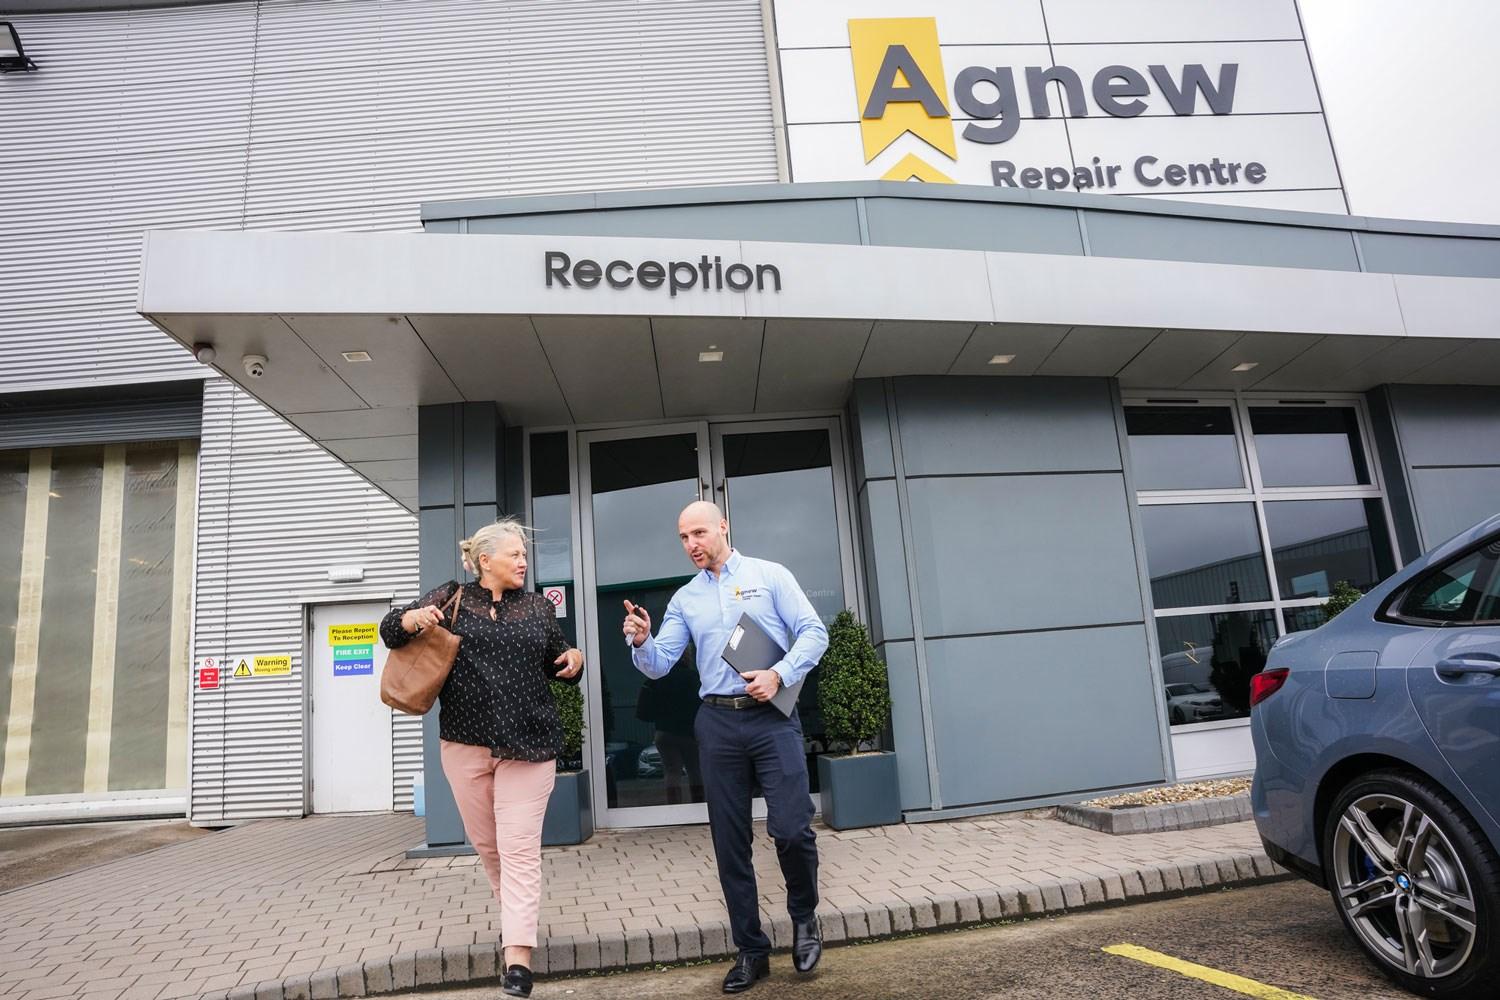 Agnew Repair Centre Vehicle Assessor talks to customer about their vehicle repairs outside of the Agnew Repair Centre